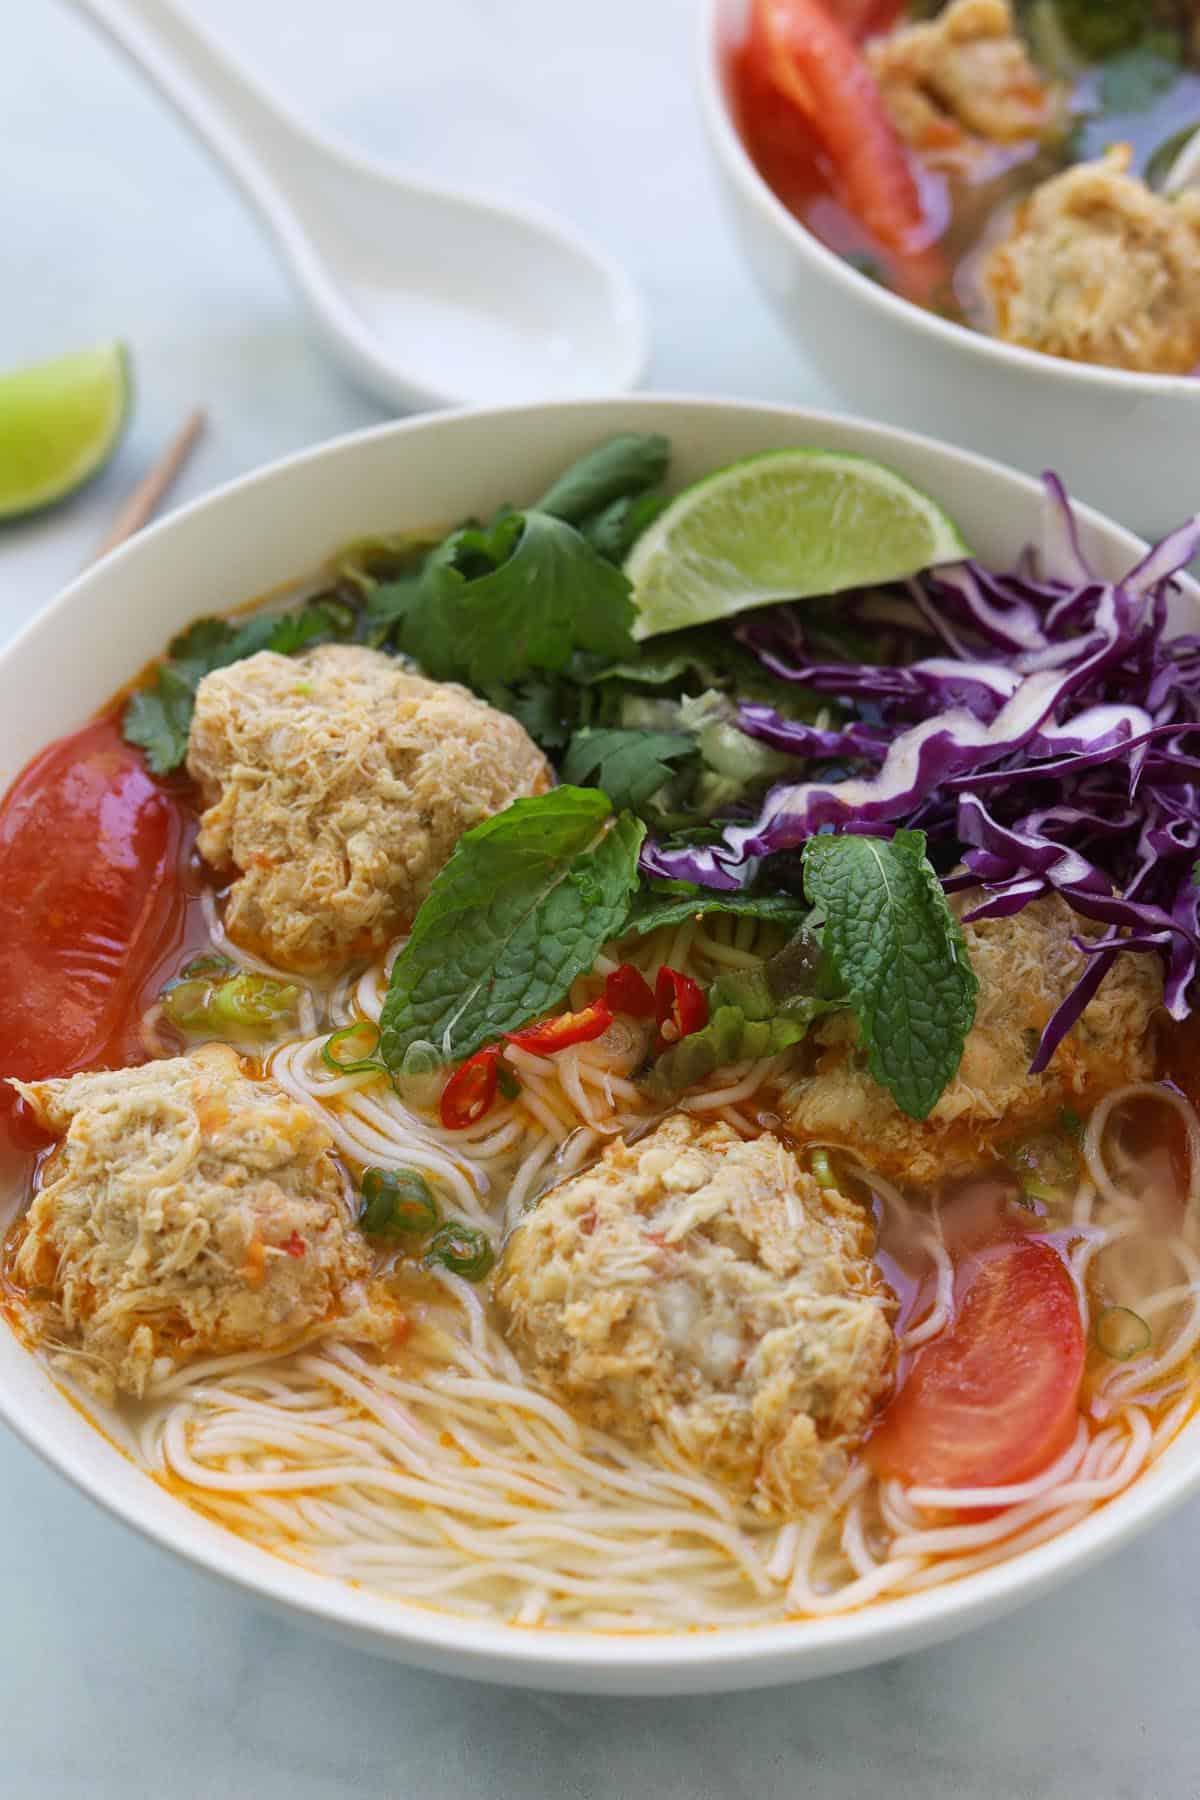 Bowl of rice noodles with soup, crab meatballs, tomatoes and garnished with fresh greens and herbs.